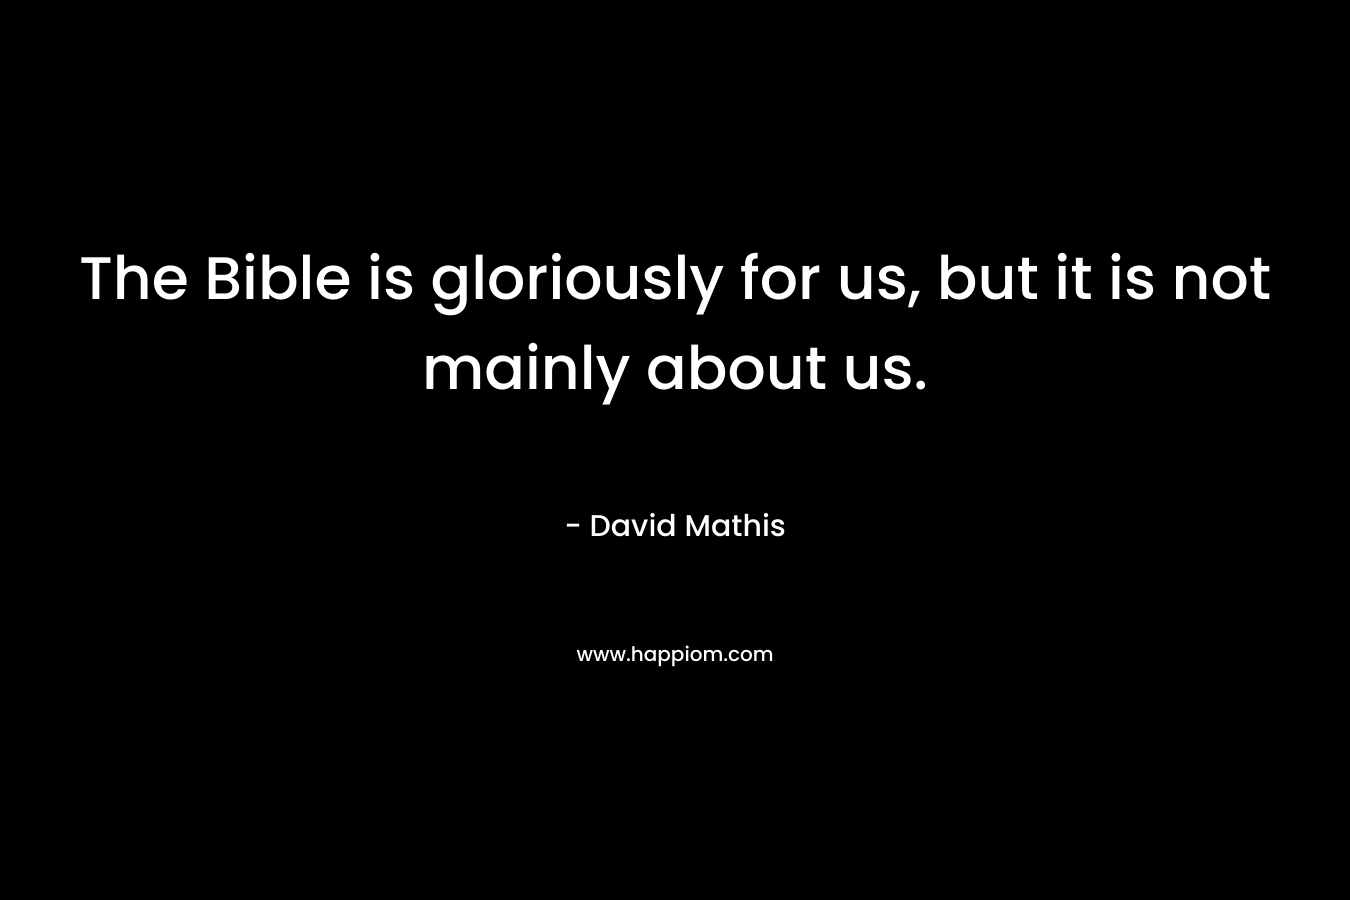 The Bible is gloriously for us, but it is not mainly about us. – David Mathis